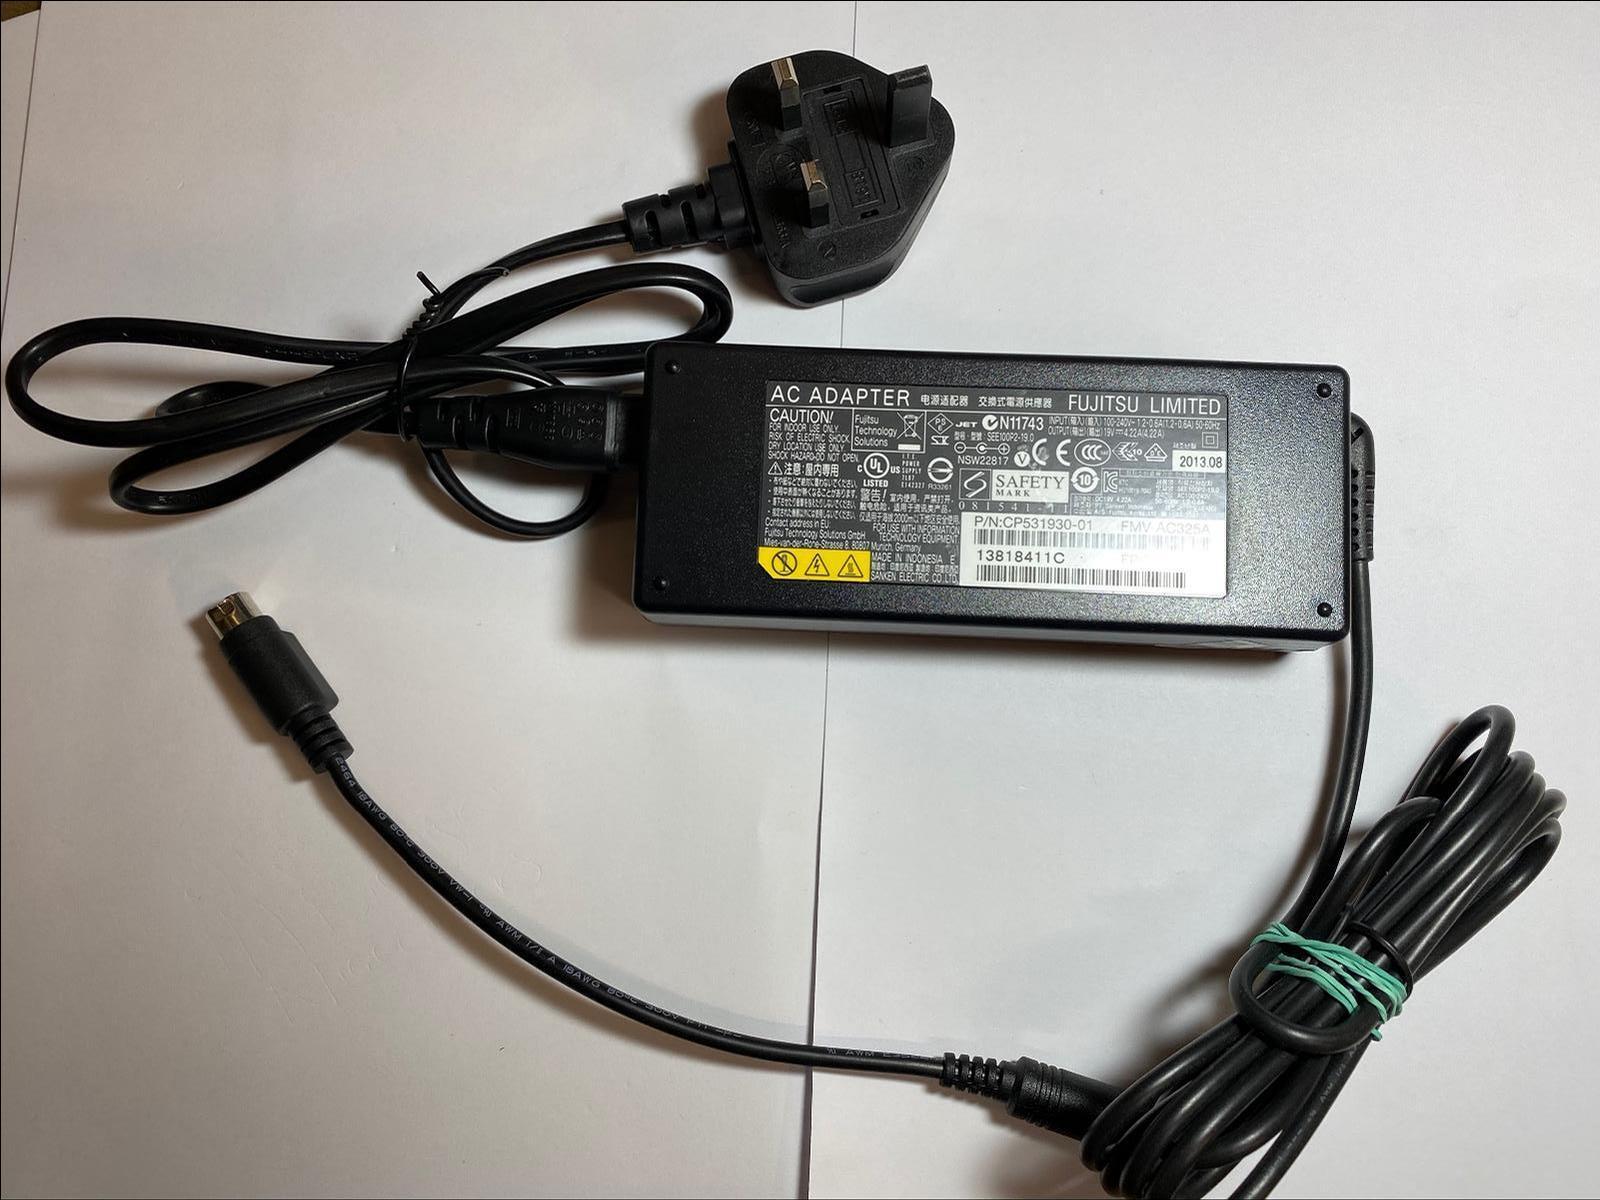 Replacement 19V 4 Pin AC Power Adaptor for J2 615 Touch Screen EPOS Till System Type Power Adapter Max. Output Power 80